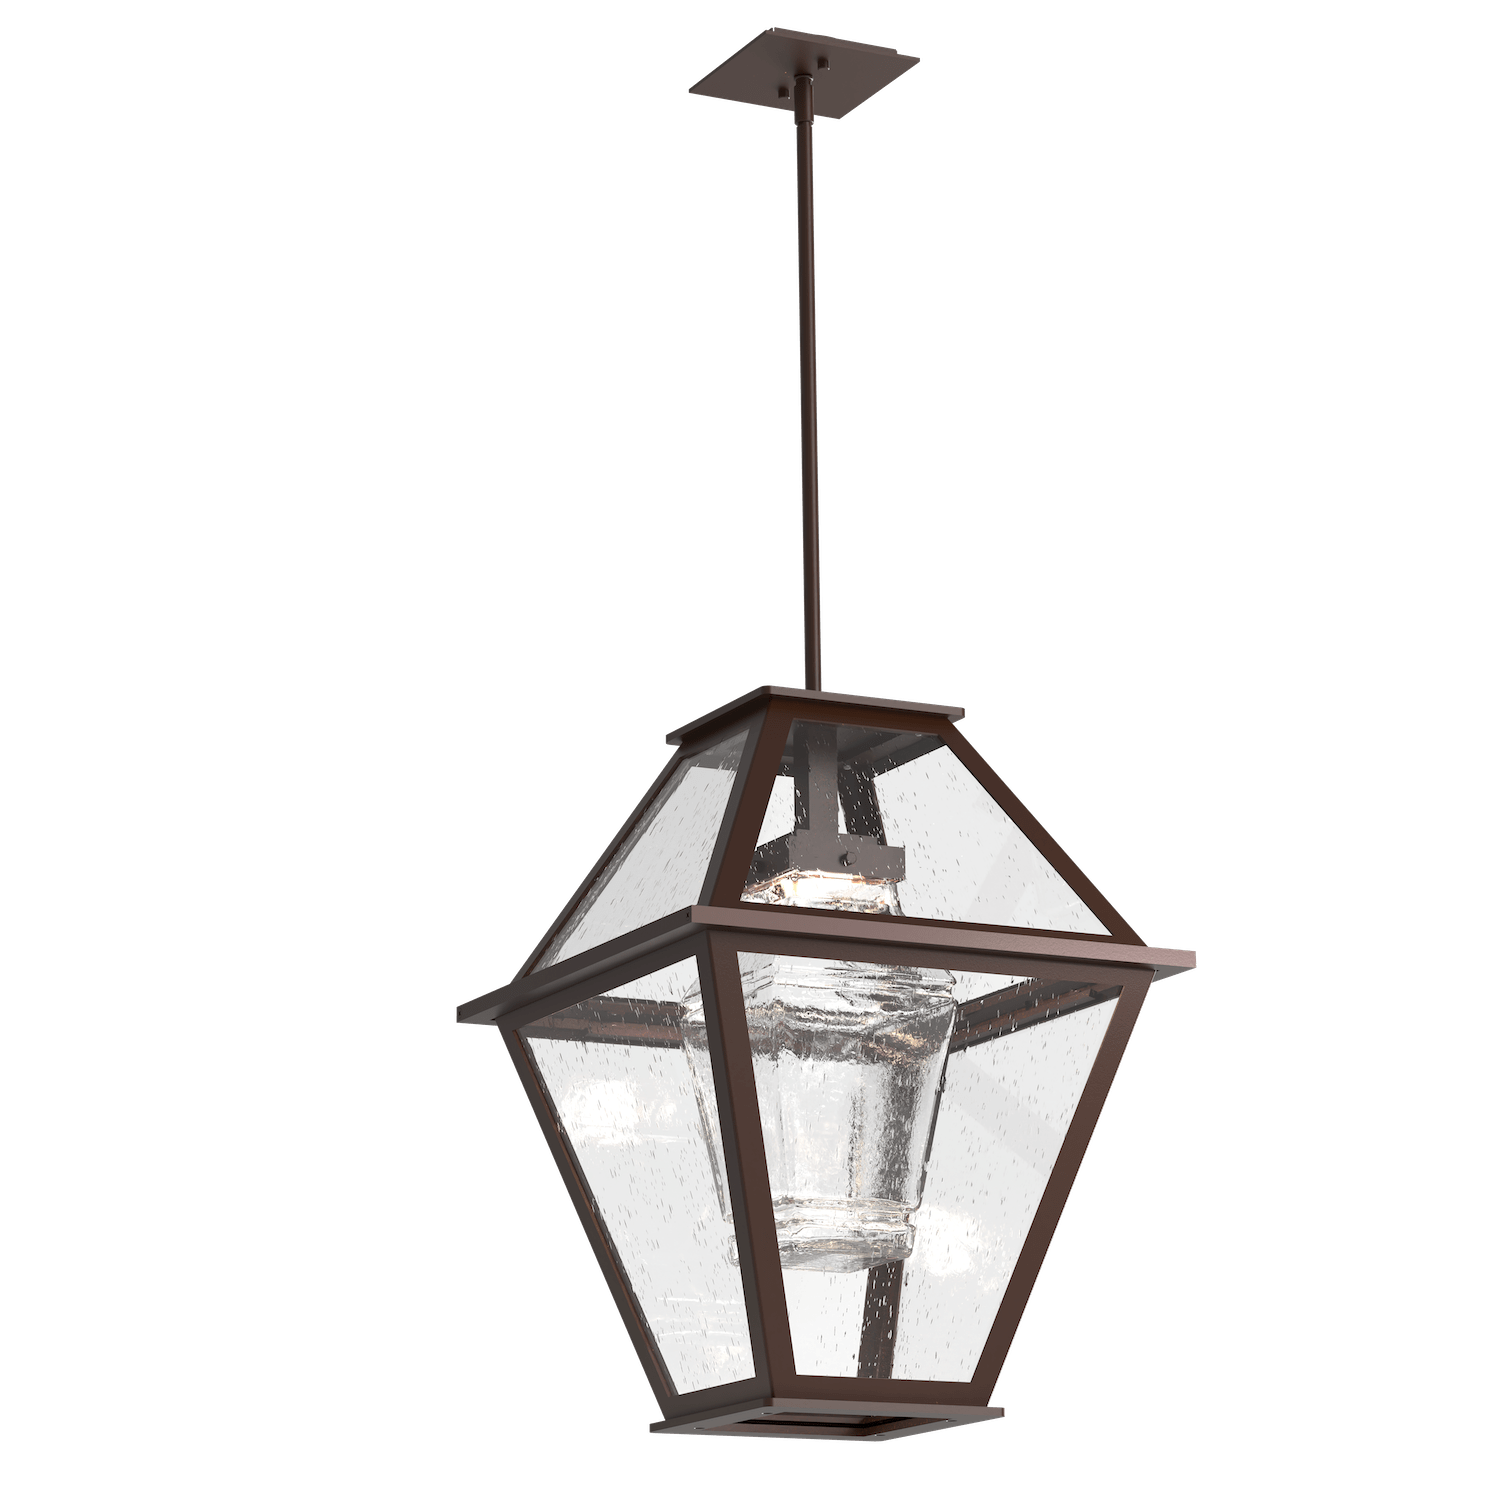 OPB0072-01-SB-C-Hammerton-Studio-Terrace-24-inch-outdoor-nested-pendant-light-with-statuary-bronze-finish-and-clear-blown-glass-shades-and-LED-lamping